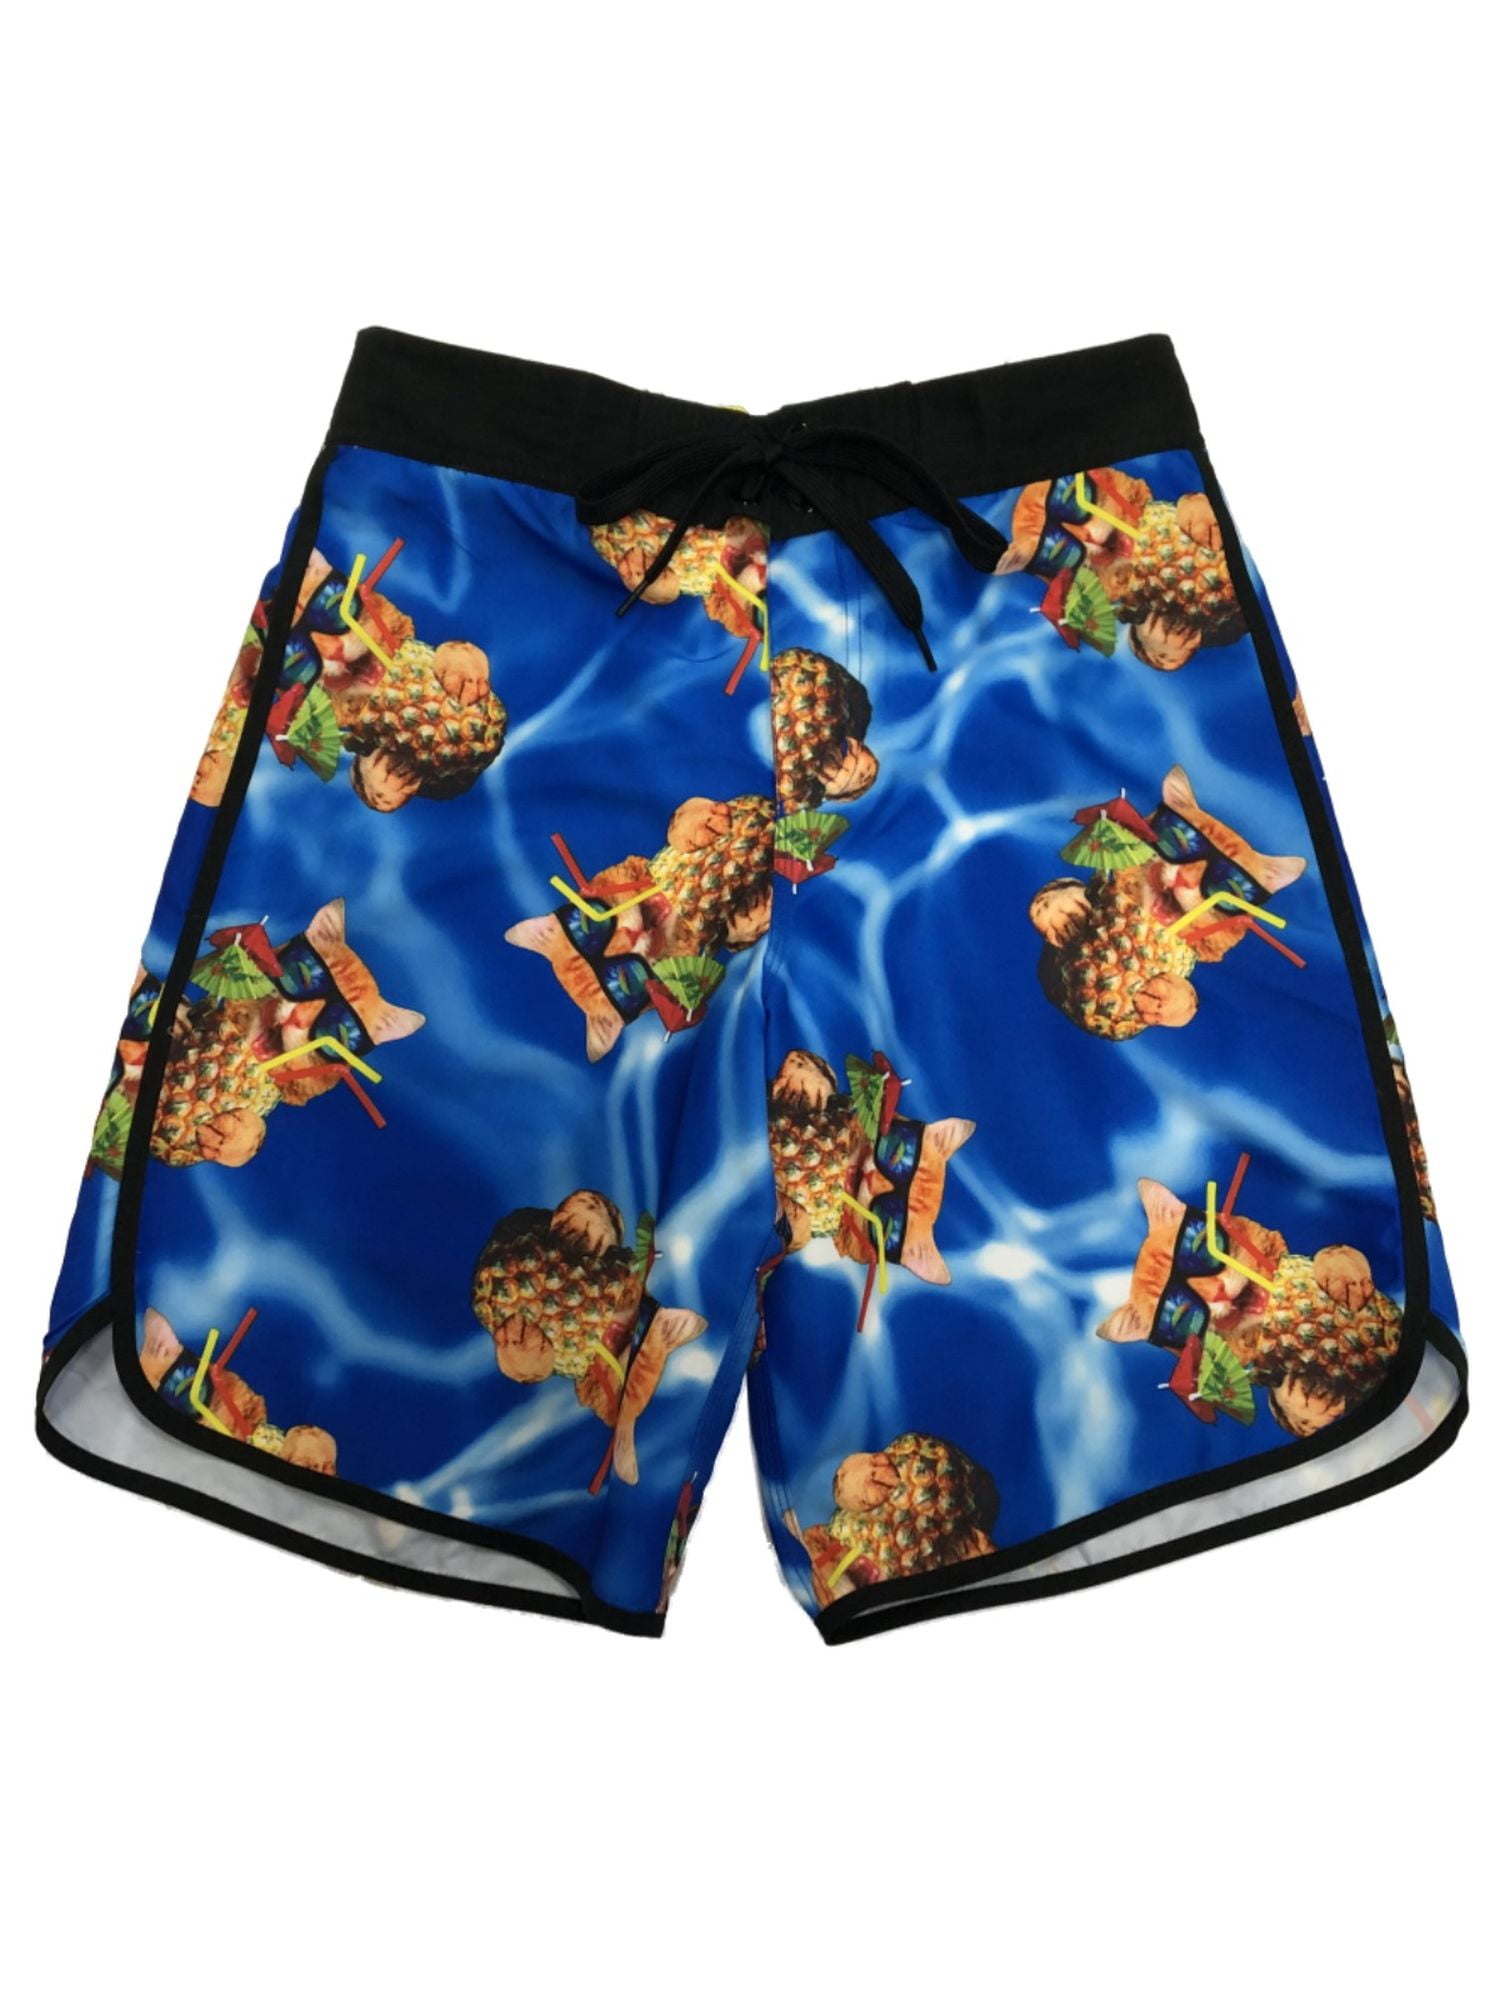 Alice in Chains Black Gives Way to Blue Mans Summer Beach Shorts Surfing Pants